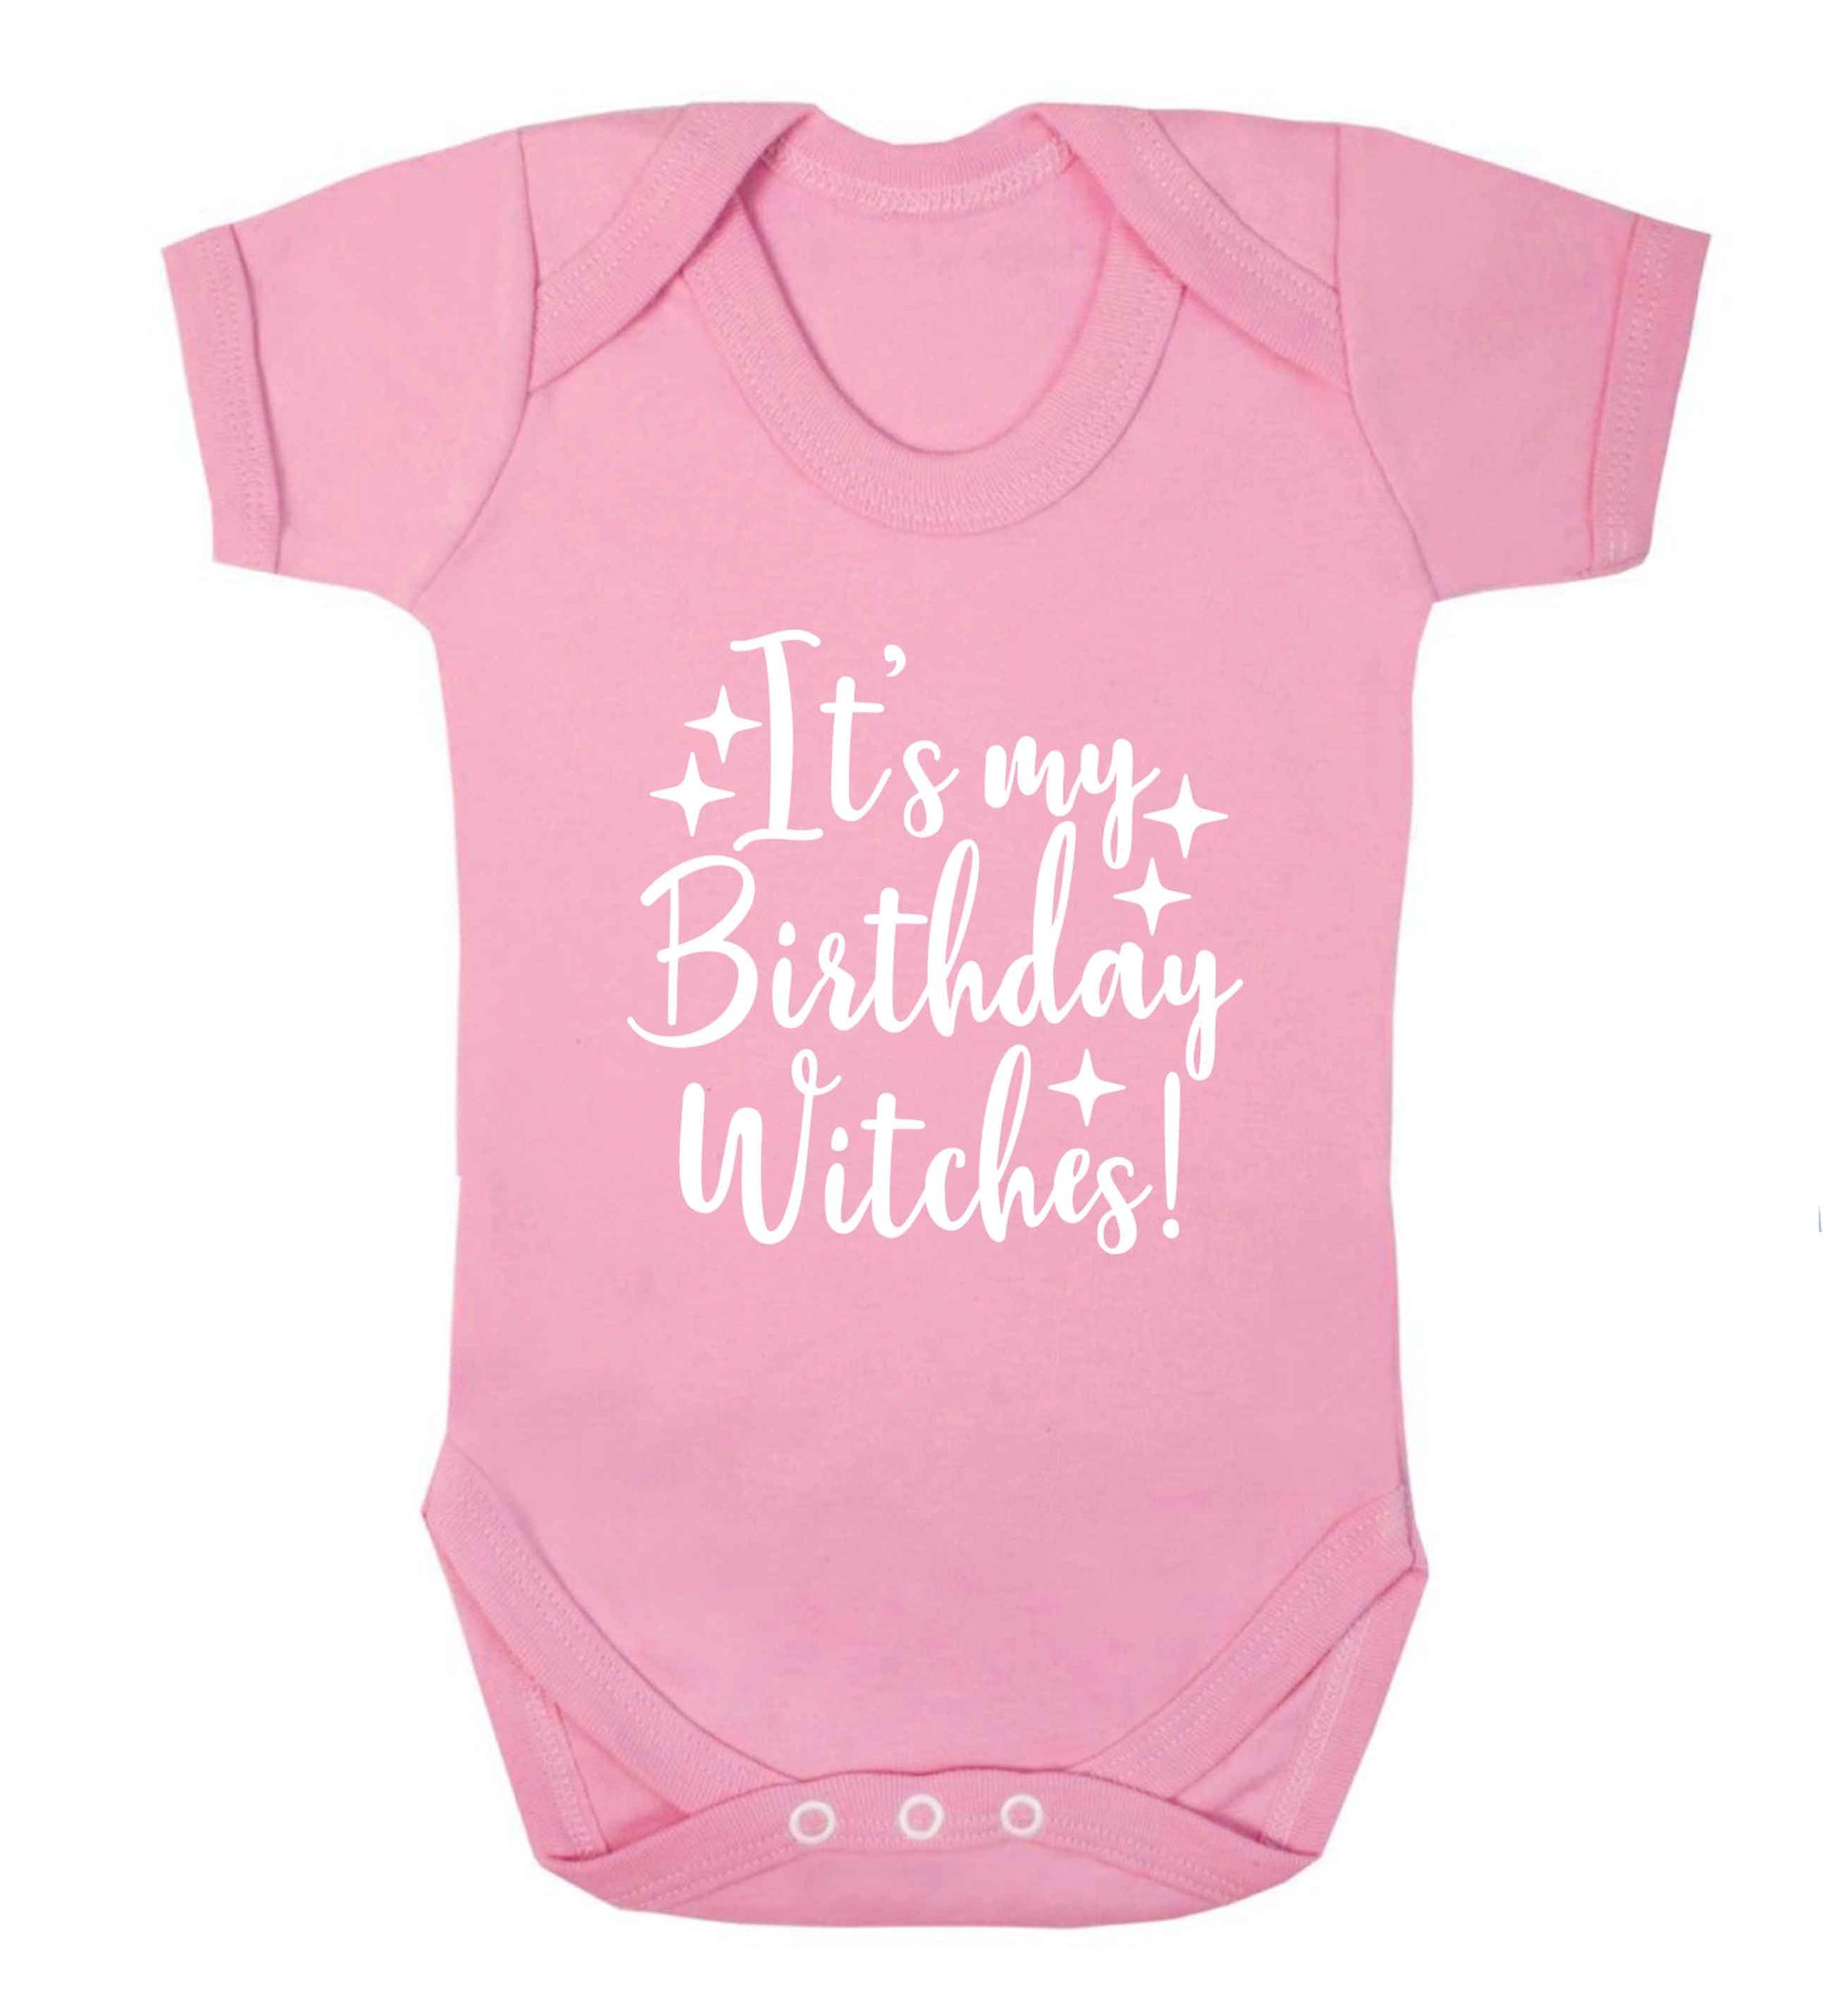 It's my birthday witches!baby vest pale pink 18-24 months